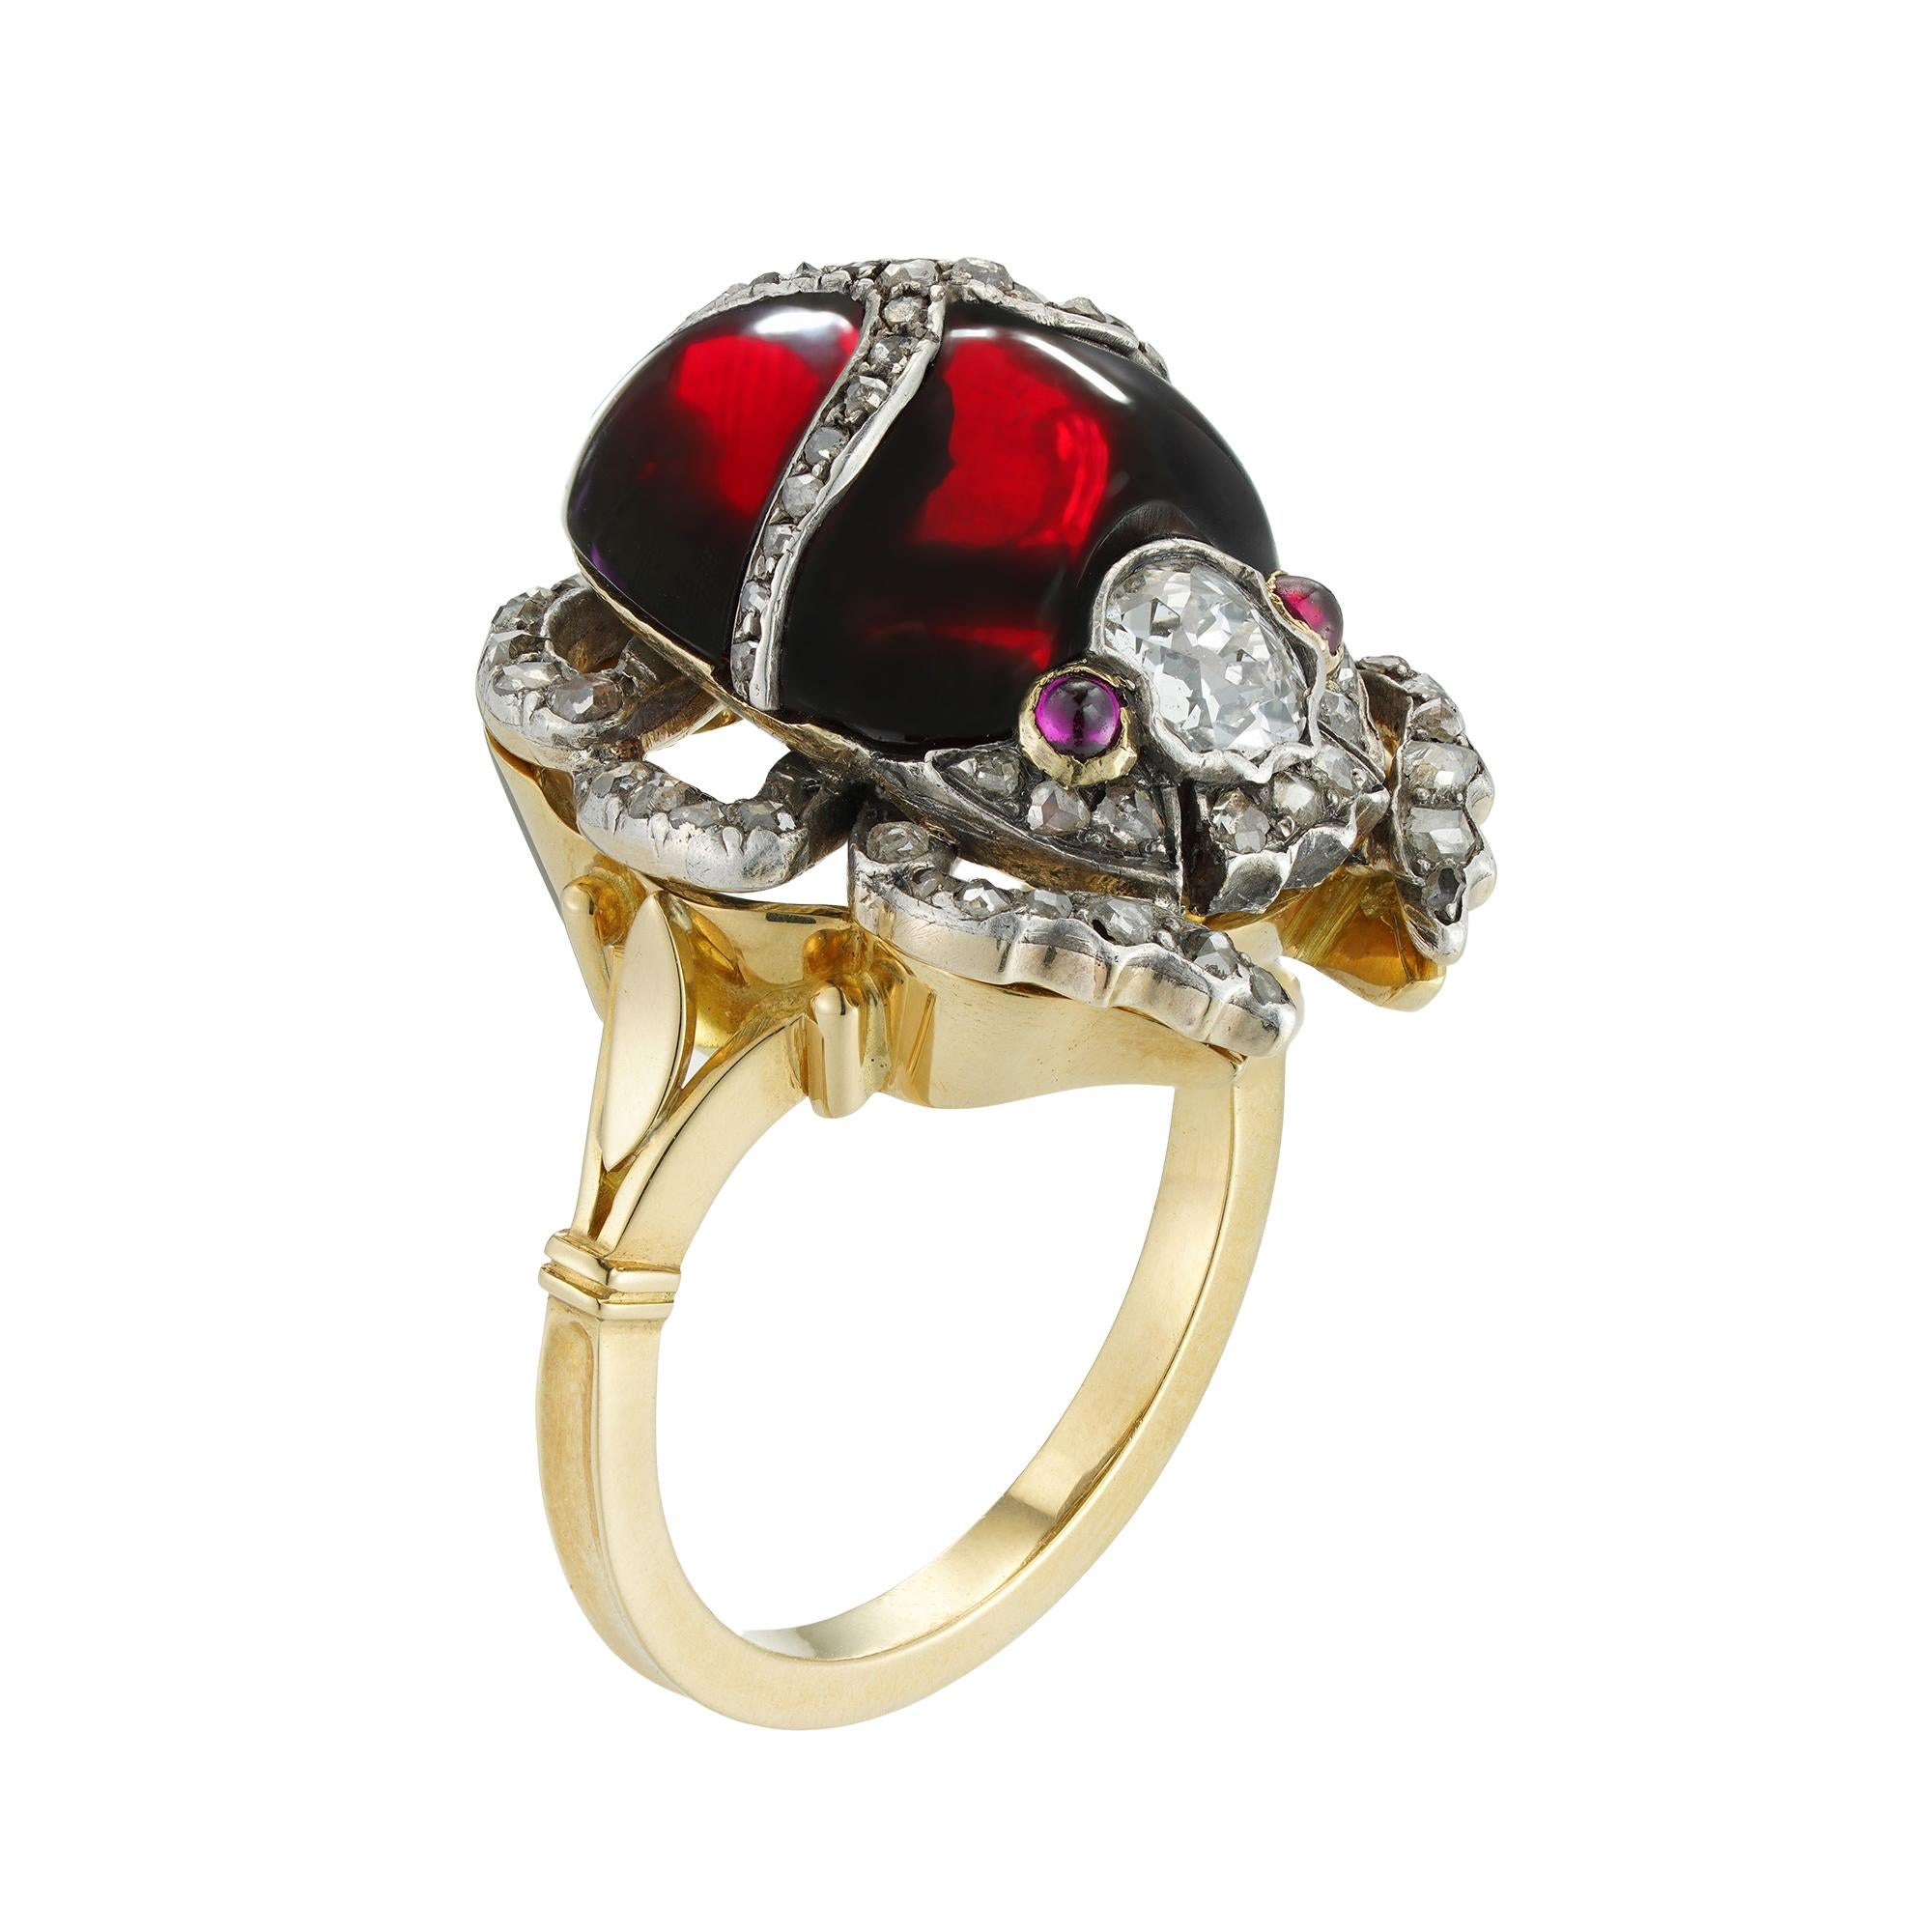 A Victorian garnet and diamond scarab pin/ring, the body of the scarab formed by a red cabochon-cut garnet applied with rose-cut diamond-set decorations , the head set with an old European-cut diamond estimated to weigh 0.3 carats and cabochon-cut